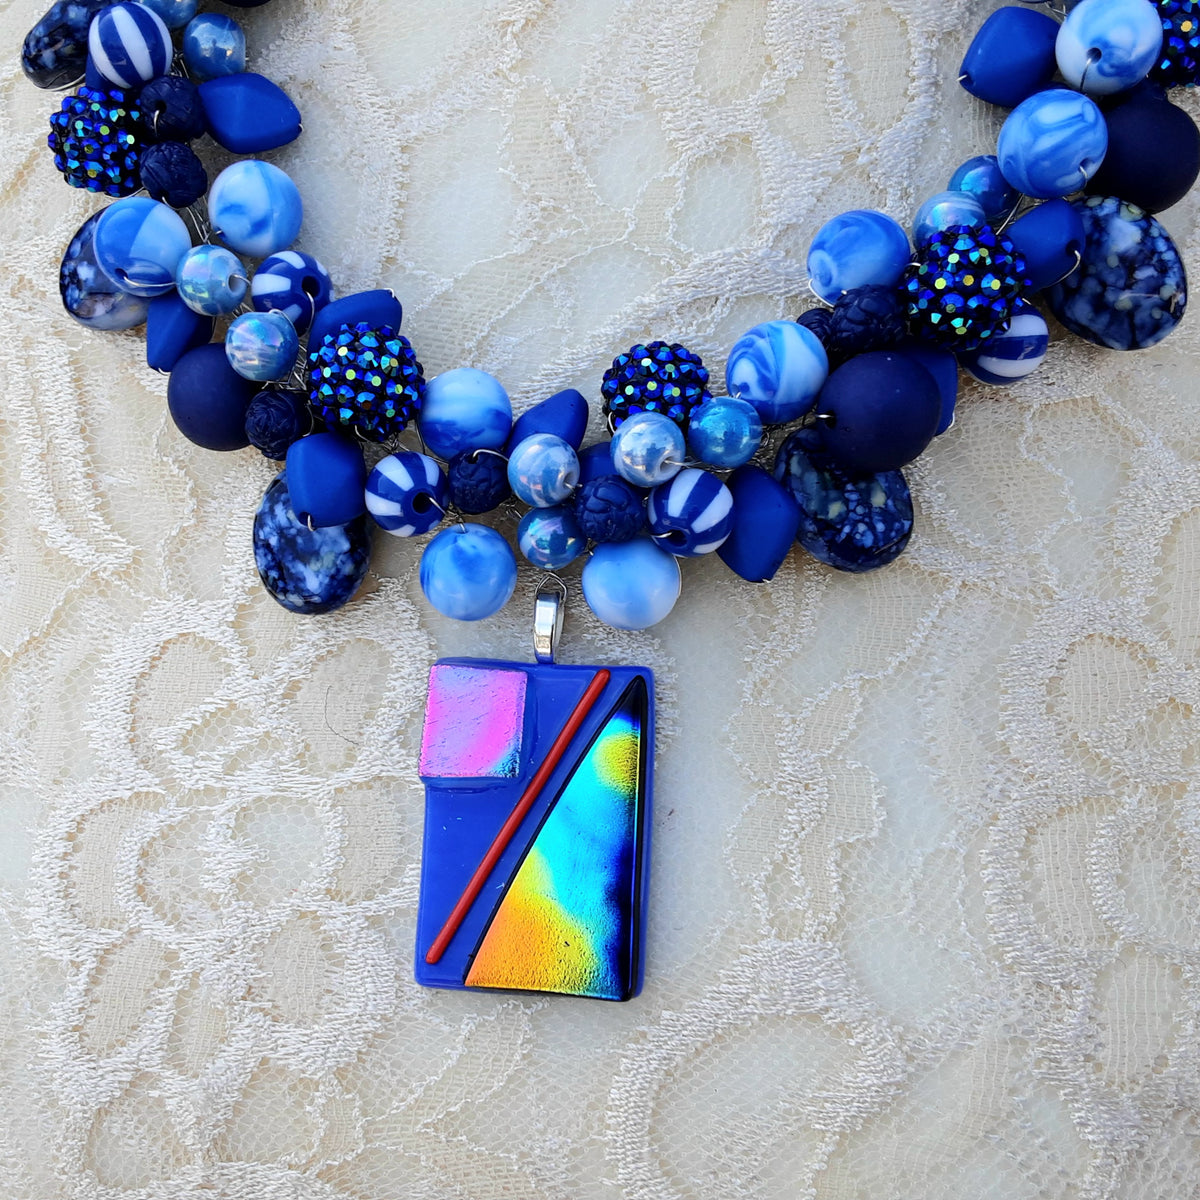 Beaded Multi Strand Statement Necklace with Fused Glass Pendant - Colorful Chunky Gift for Her - Mother of the Bride Bib